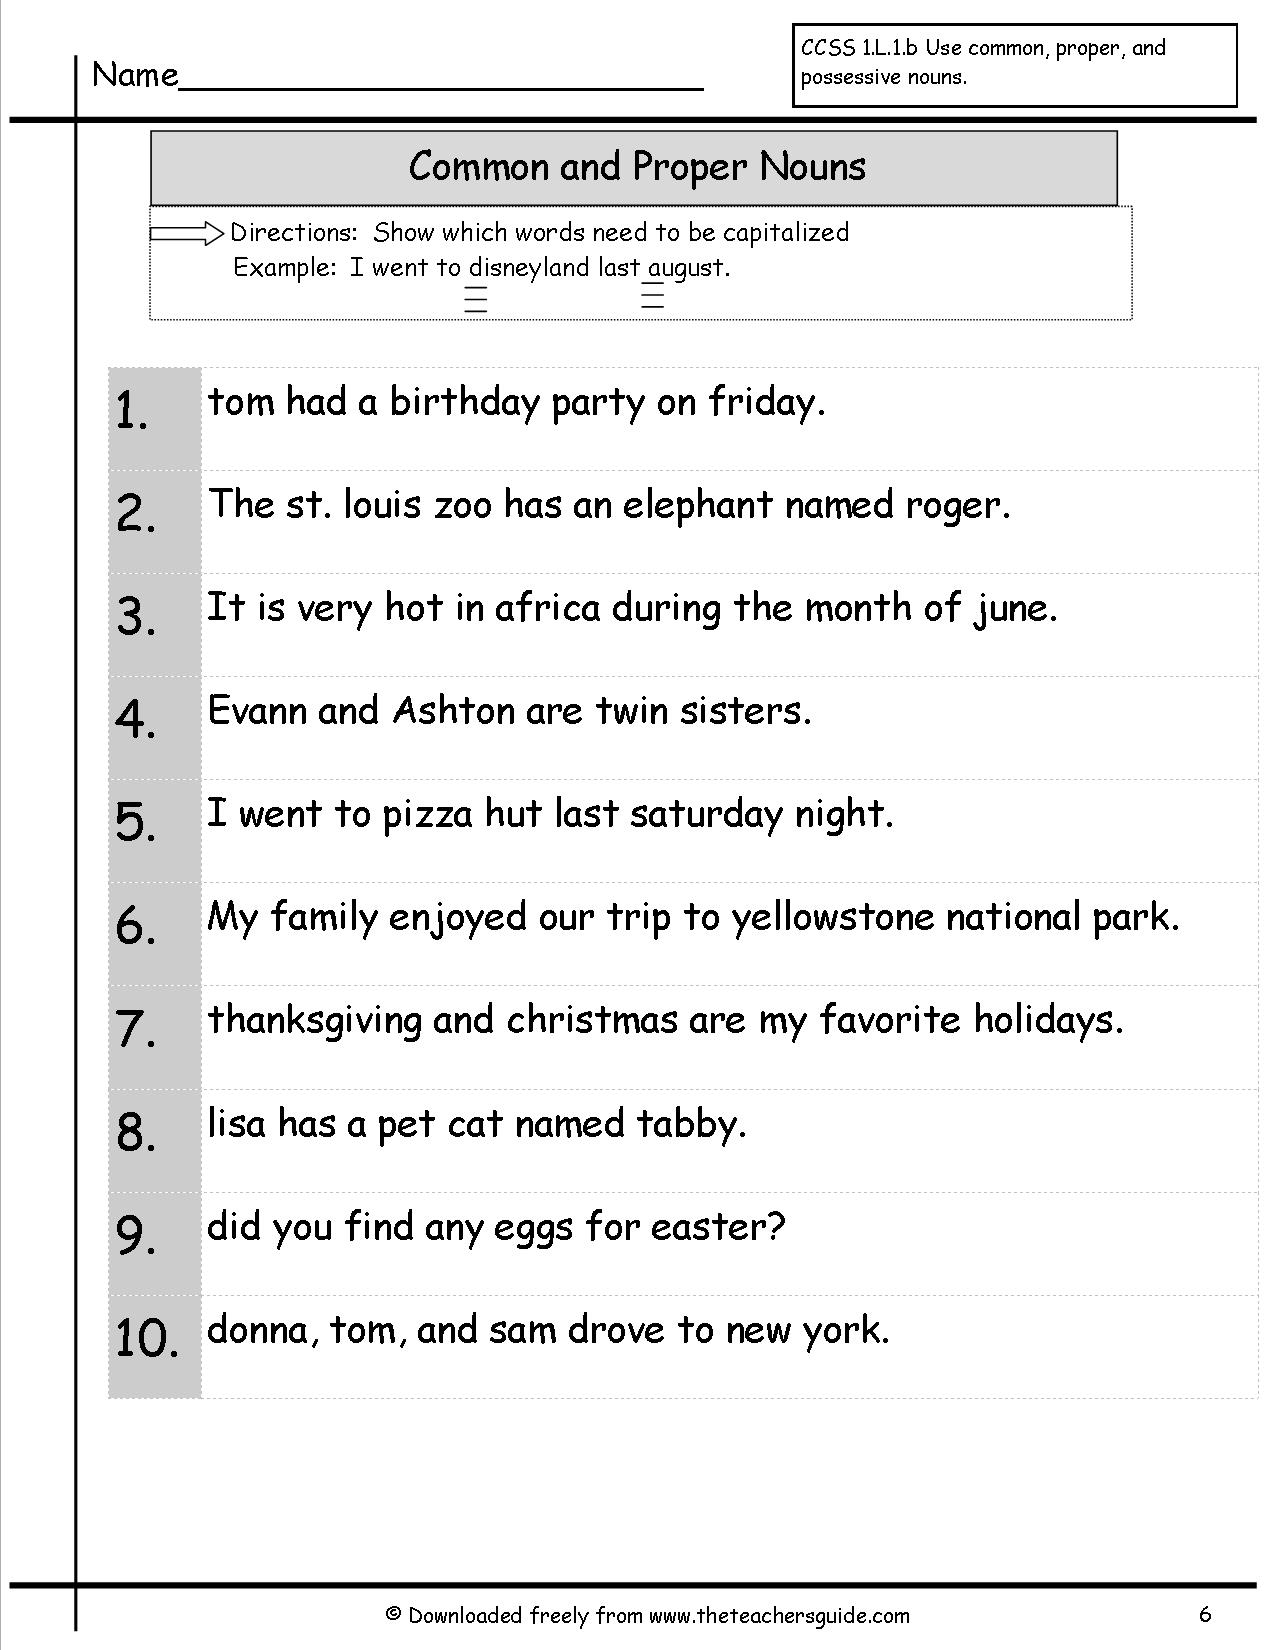 Common and Proper Noun Worksheet First Grade